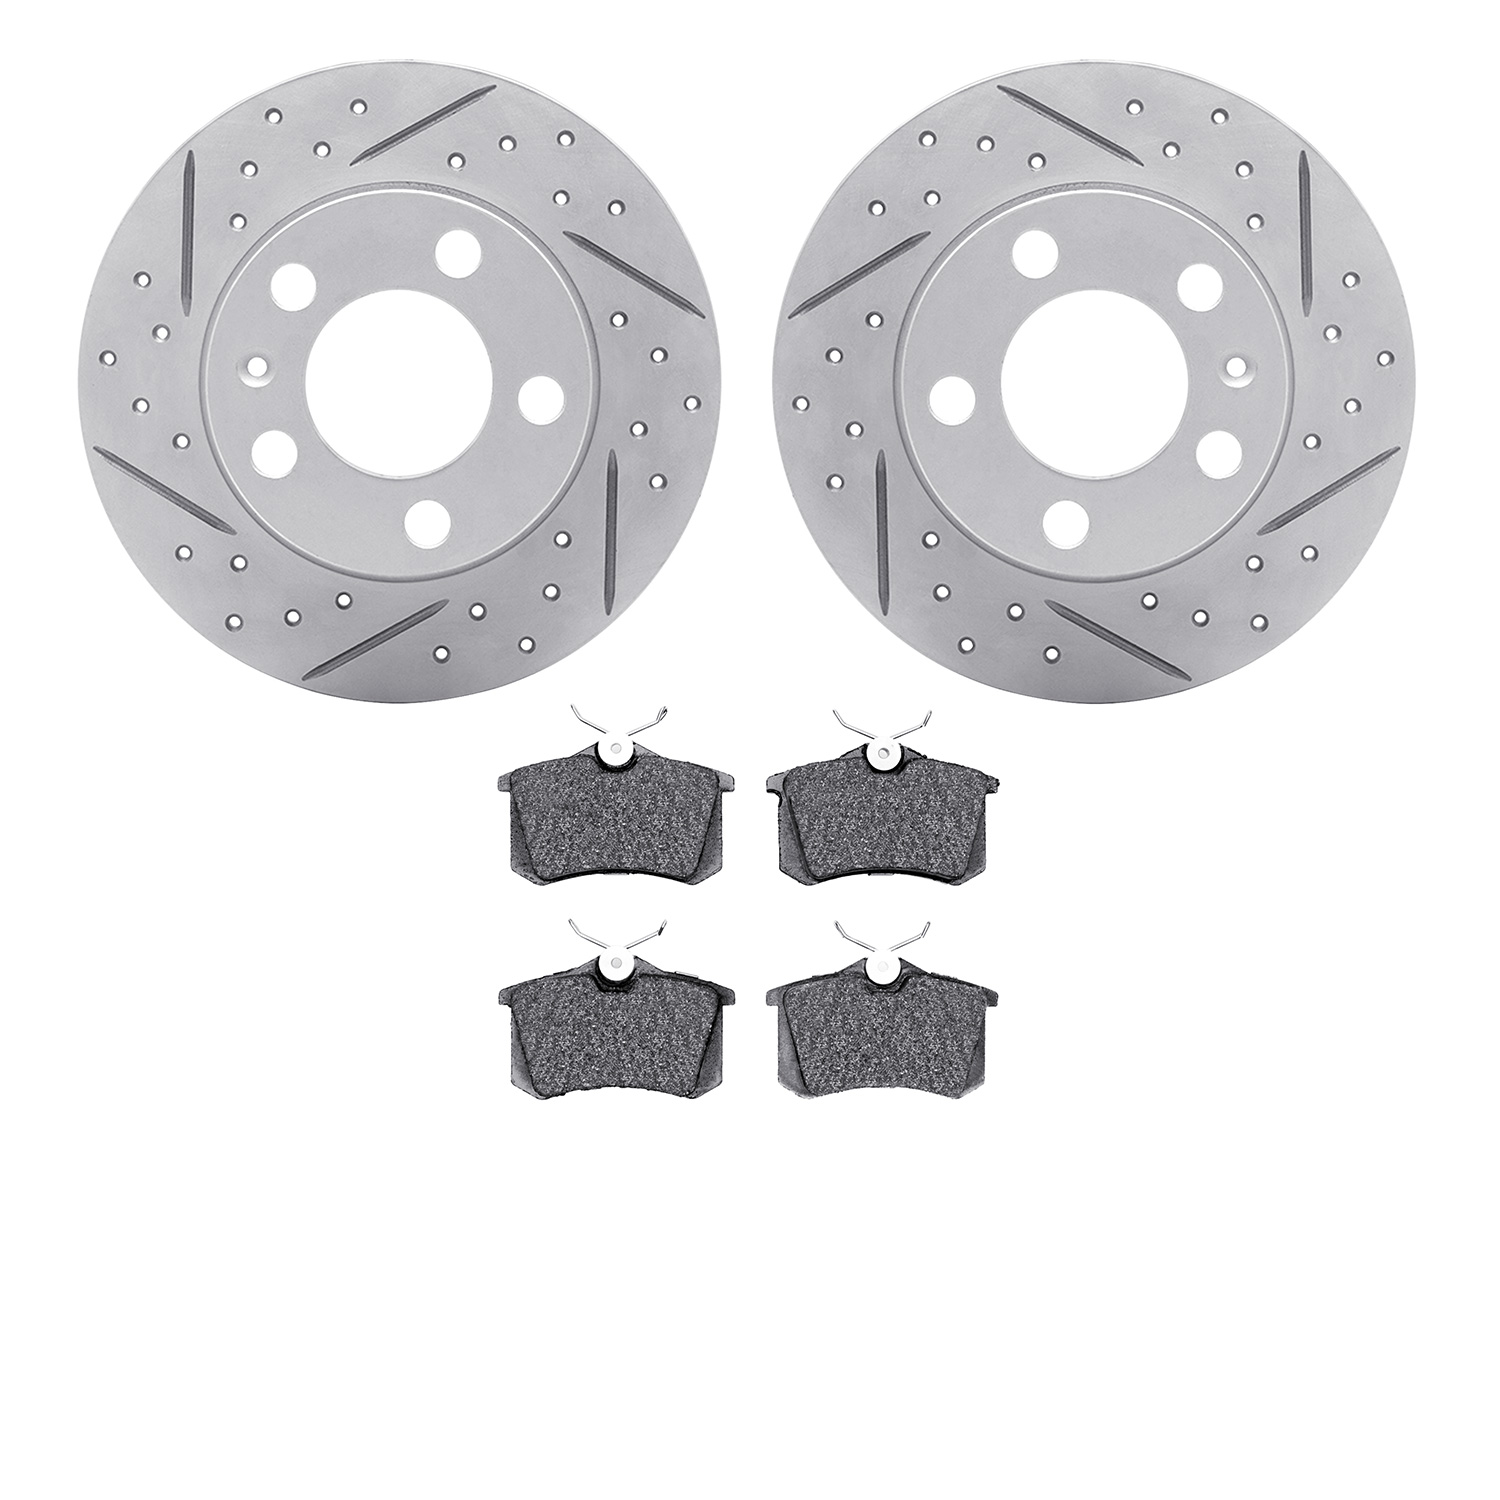 2502-74018 Geoperformance Drilled/Slotted Rotors w/5000 Advanced Brake Pads Kit, 1998-2020 Multiple Makes/Models, Position: Rear